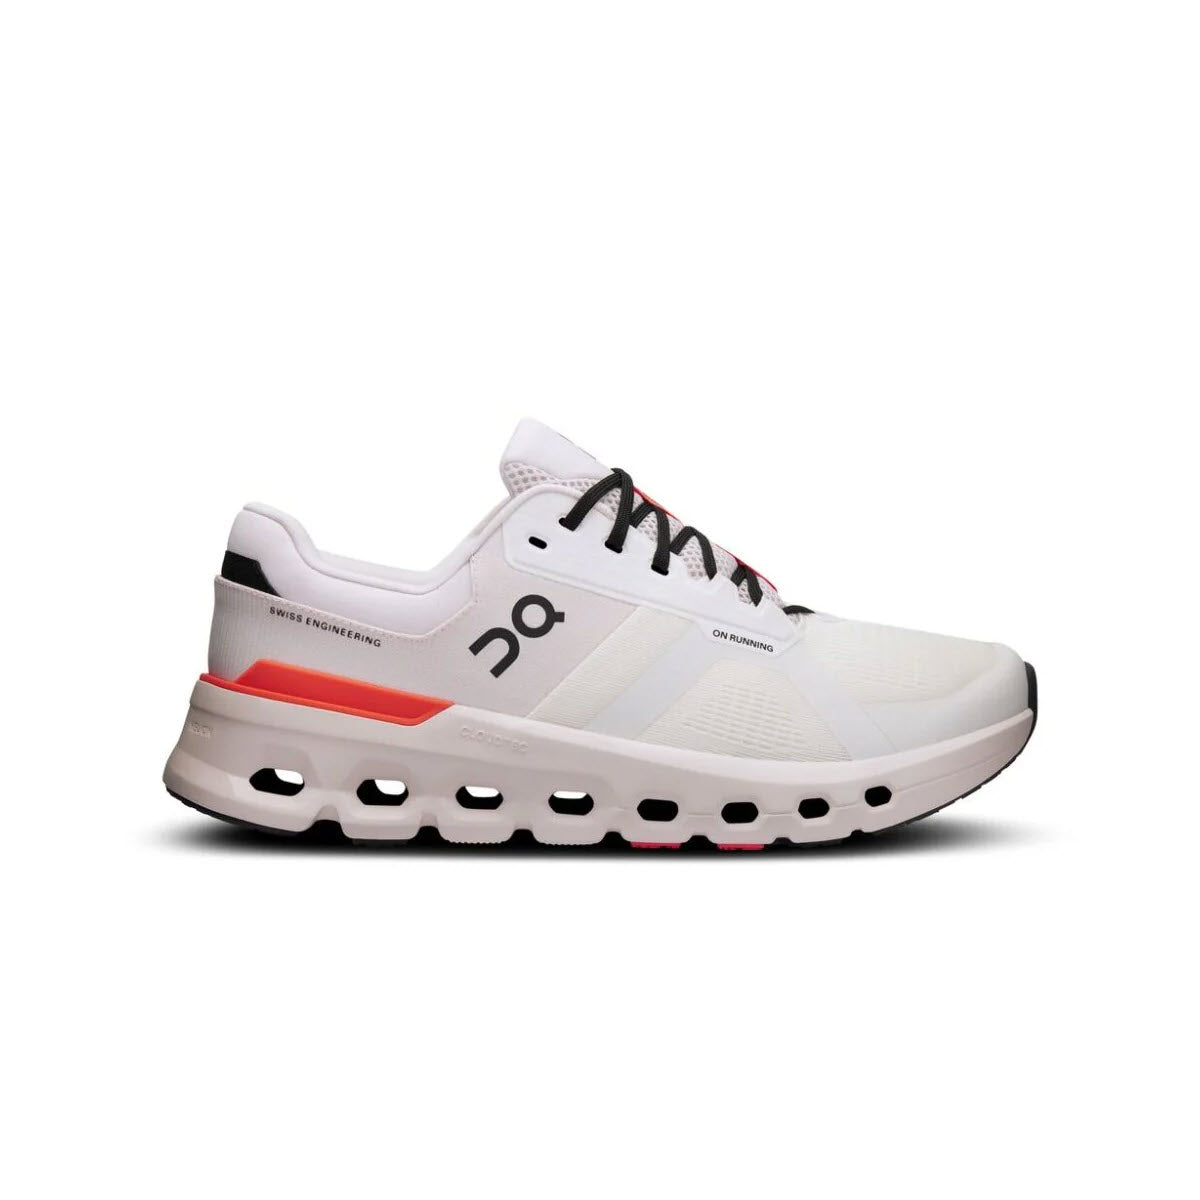 White ON CLOUDRUNNER 2 UNDYED/SAND - MENS athletic shoe with black and red accents on a white background, featuring a Helion™ superfoam midsole.